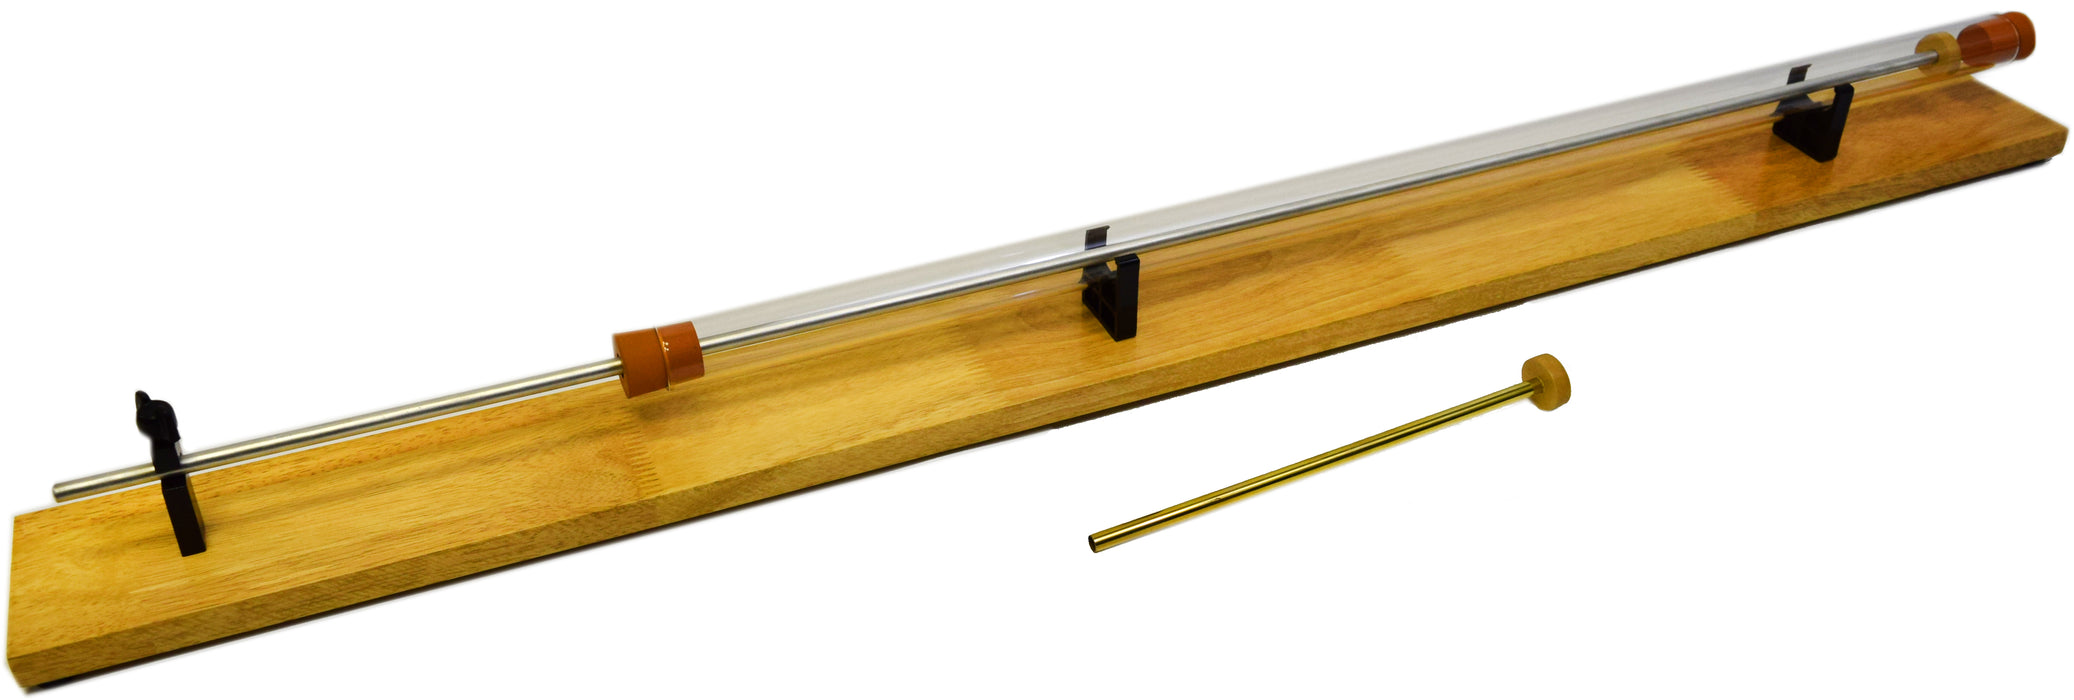 Kundt's Tube, Unmounted, Glass, Cork Piston, Stable Wooden Base, 33" Length - Eisco Labs